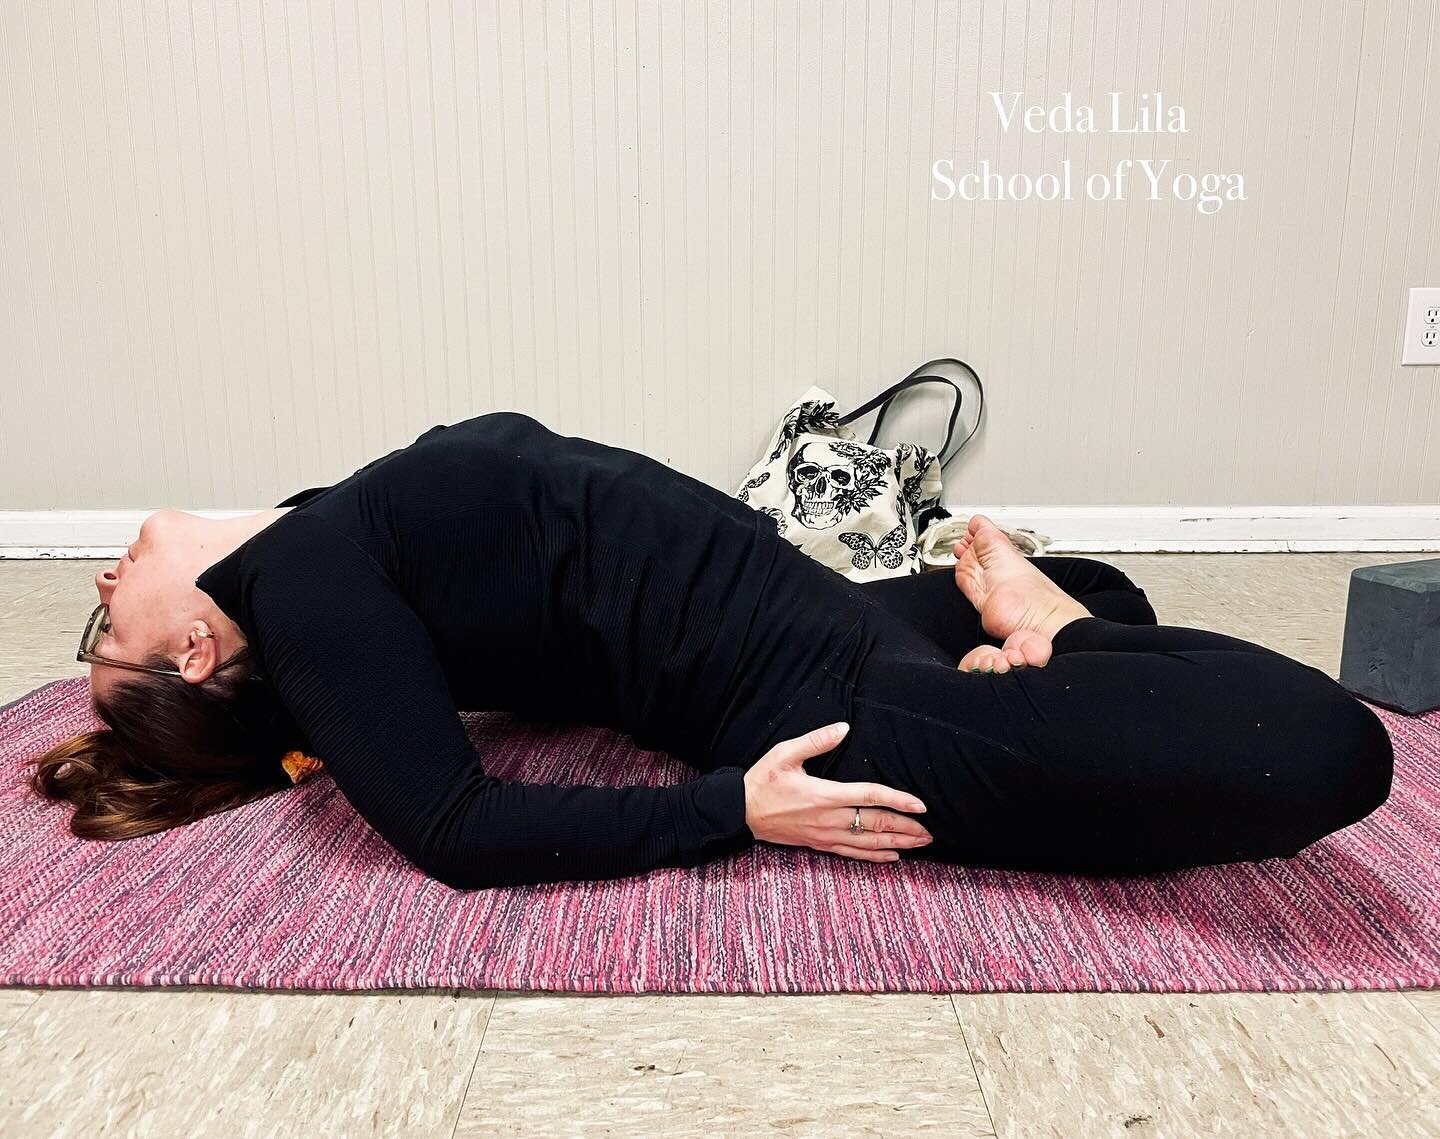 April (9th FREE), (10th $10) &amp; (11th $10) ~ Yoga with Johanna Marsan E-RYT500

Tuesday 6-7:30pm ~ Yoga 101 for Everyone - Free ❤️🕊️!

Wednesday 6-7:15pm ~ The Golden Orb Guided Relaxation snd Healing Sound Bath

Thursday 6-7:30pm ~ Traditional H